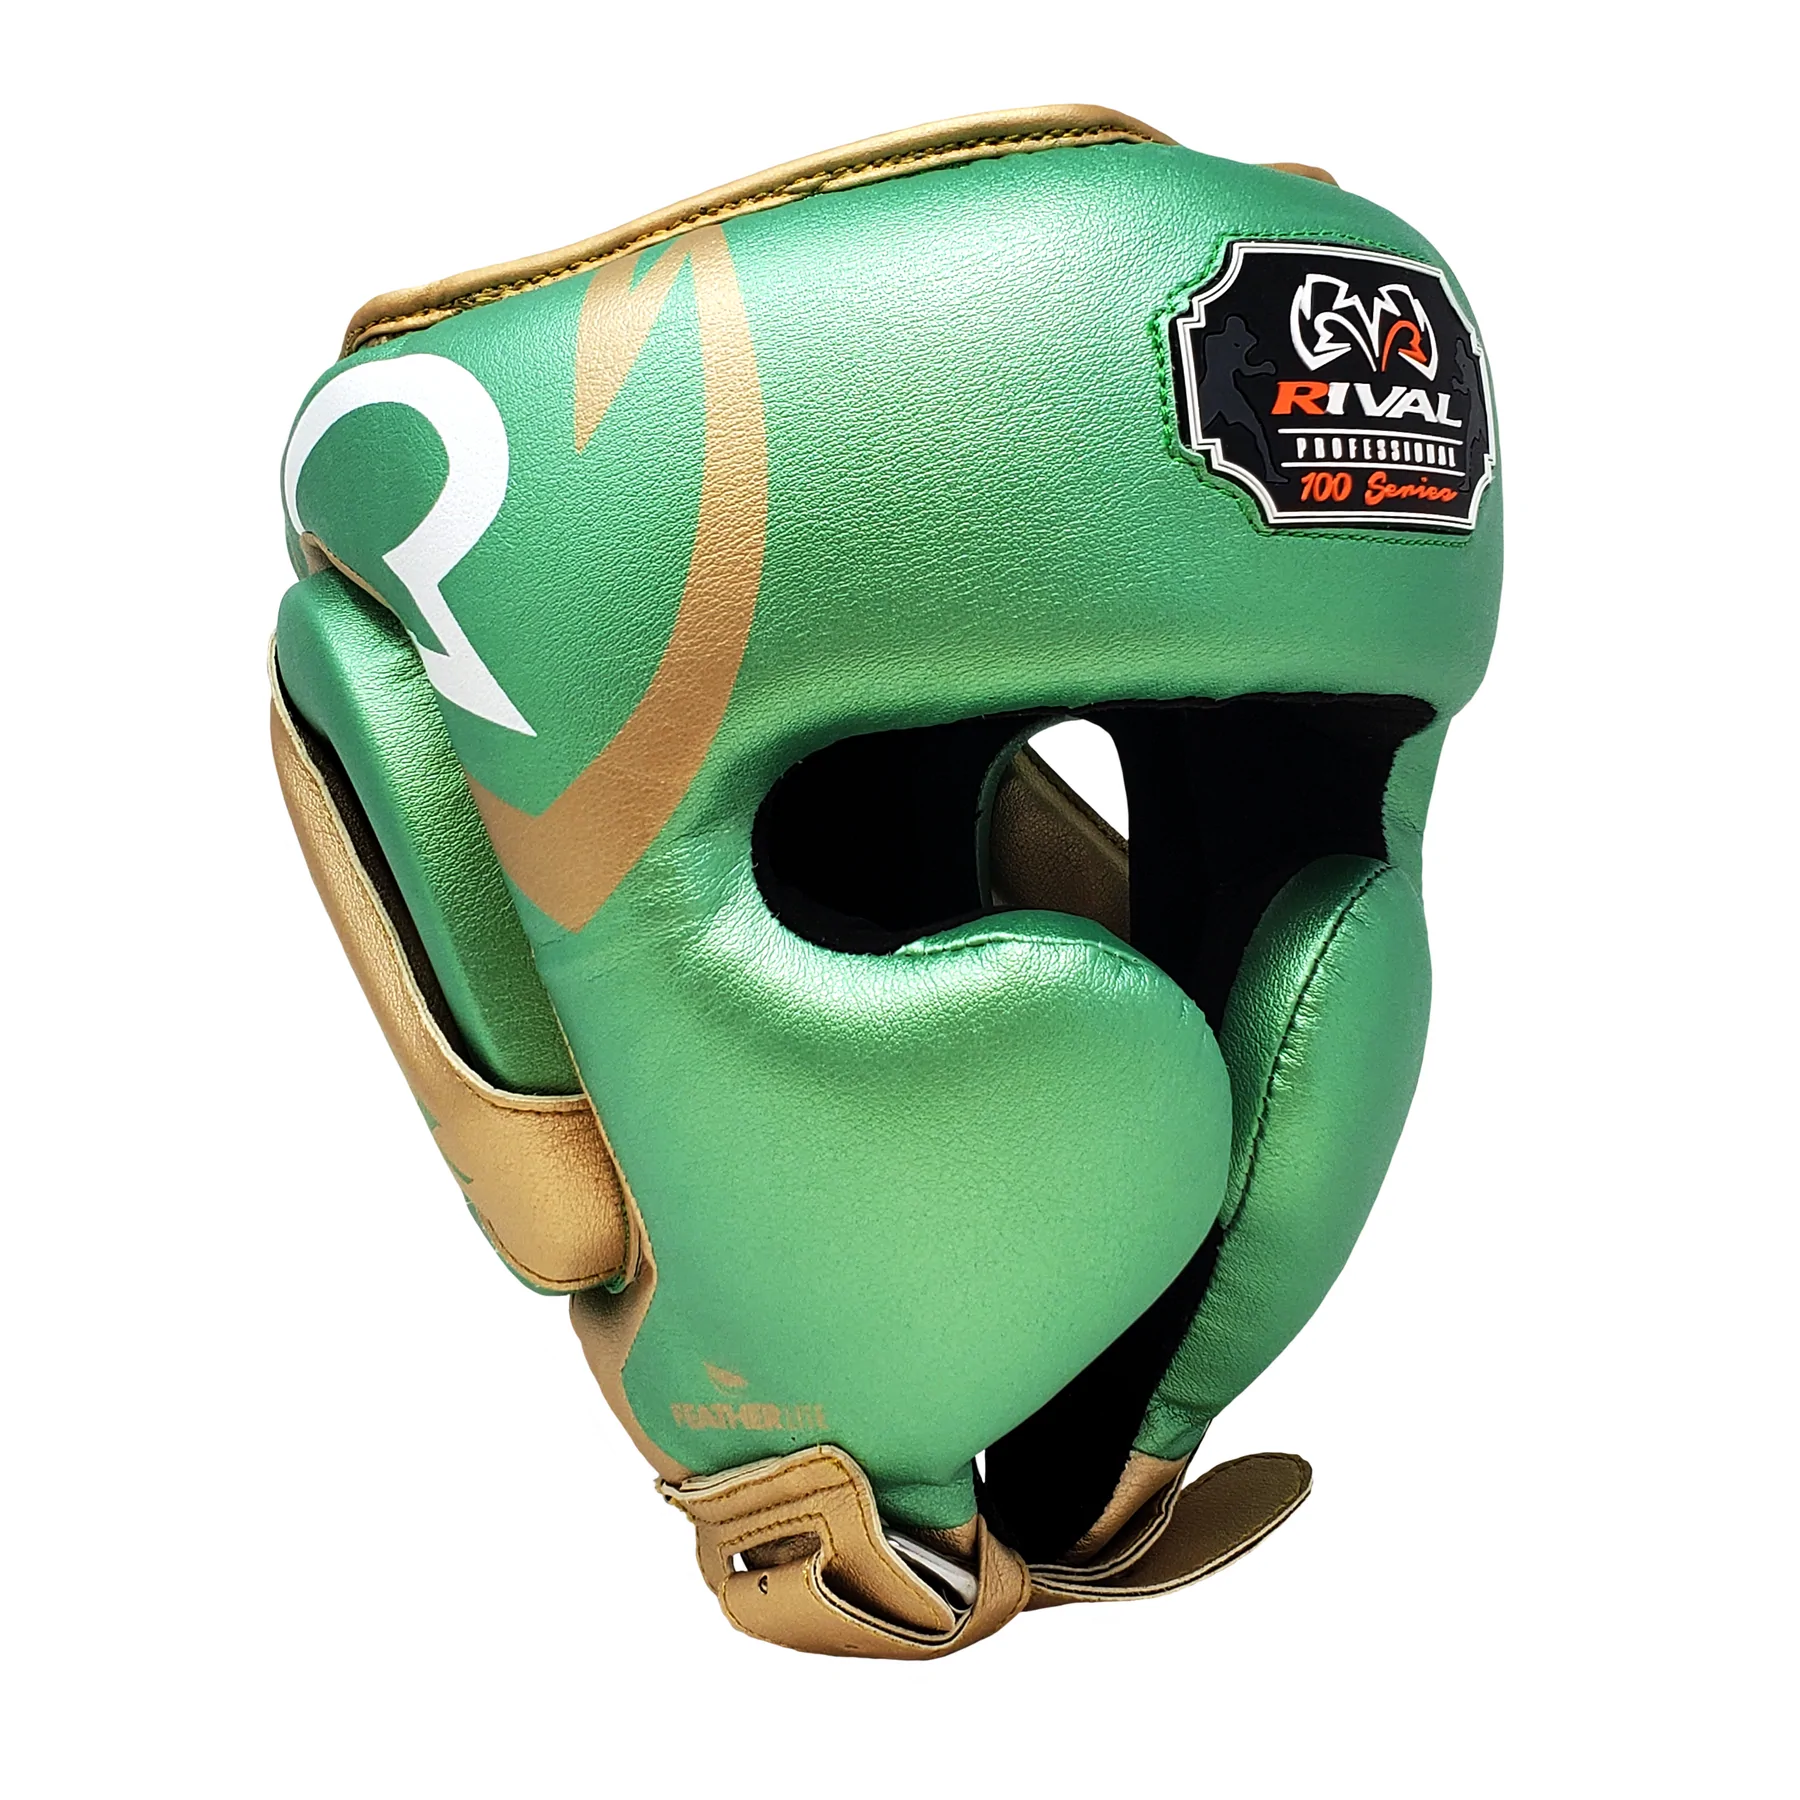 casque vert/or rival rhg100 pro